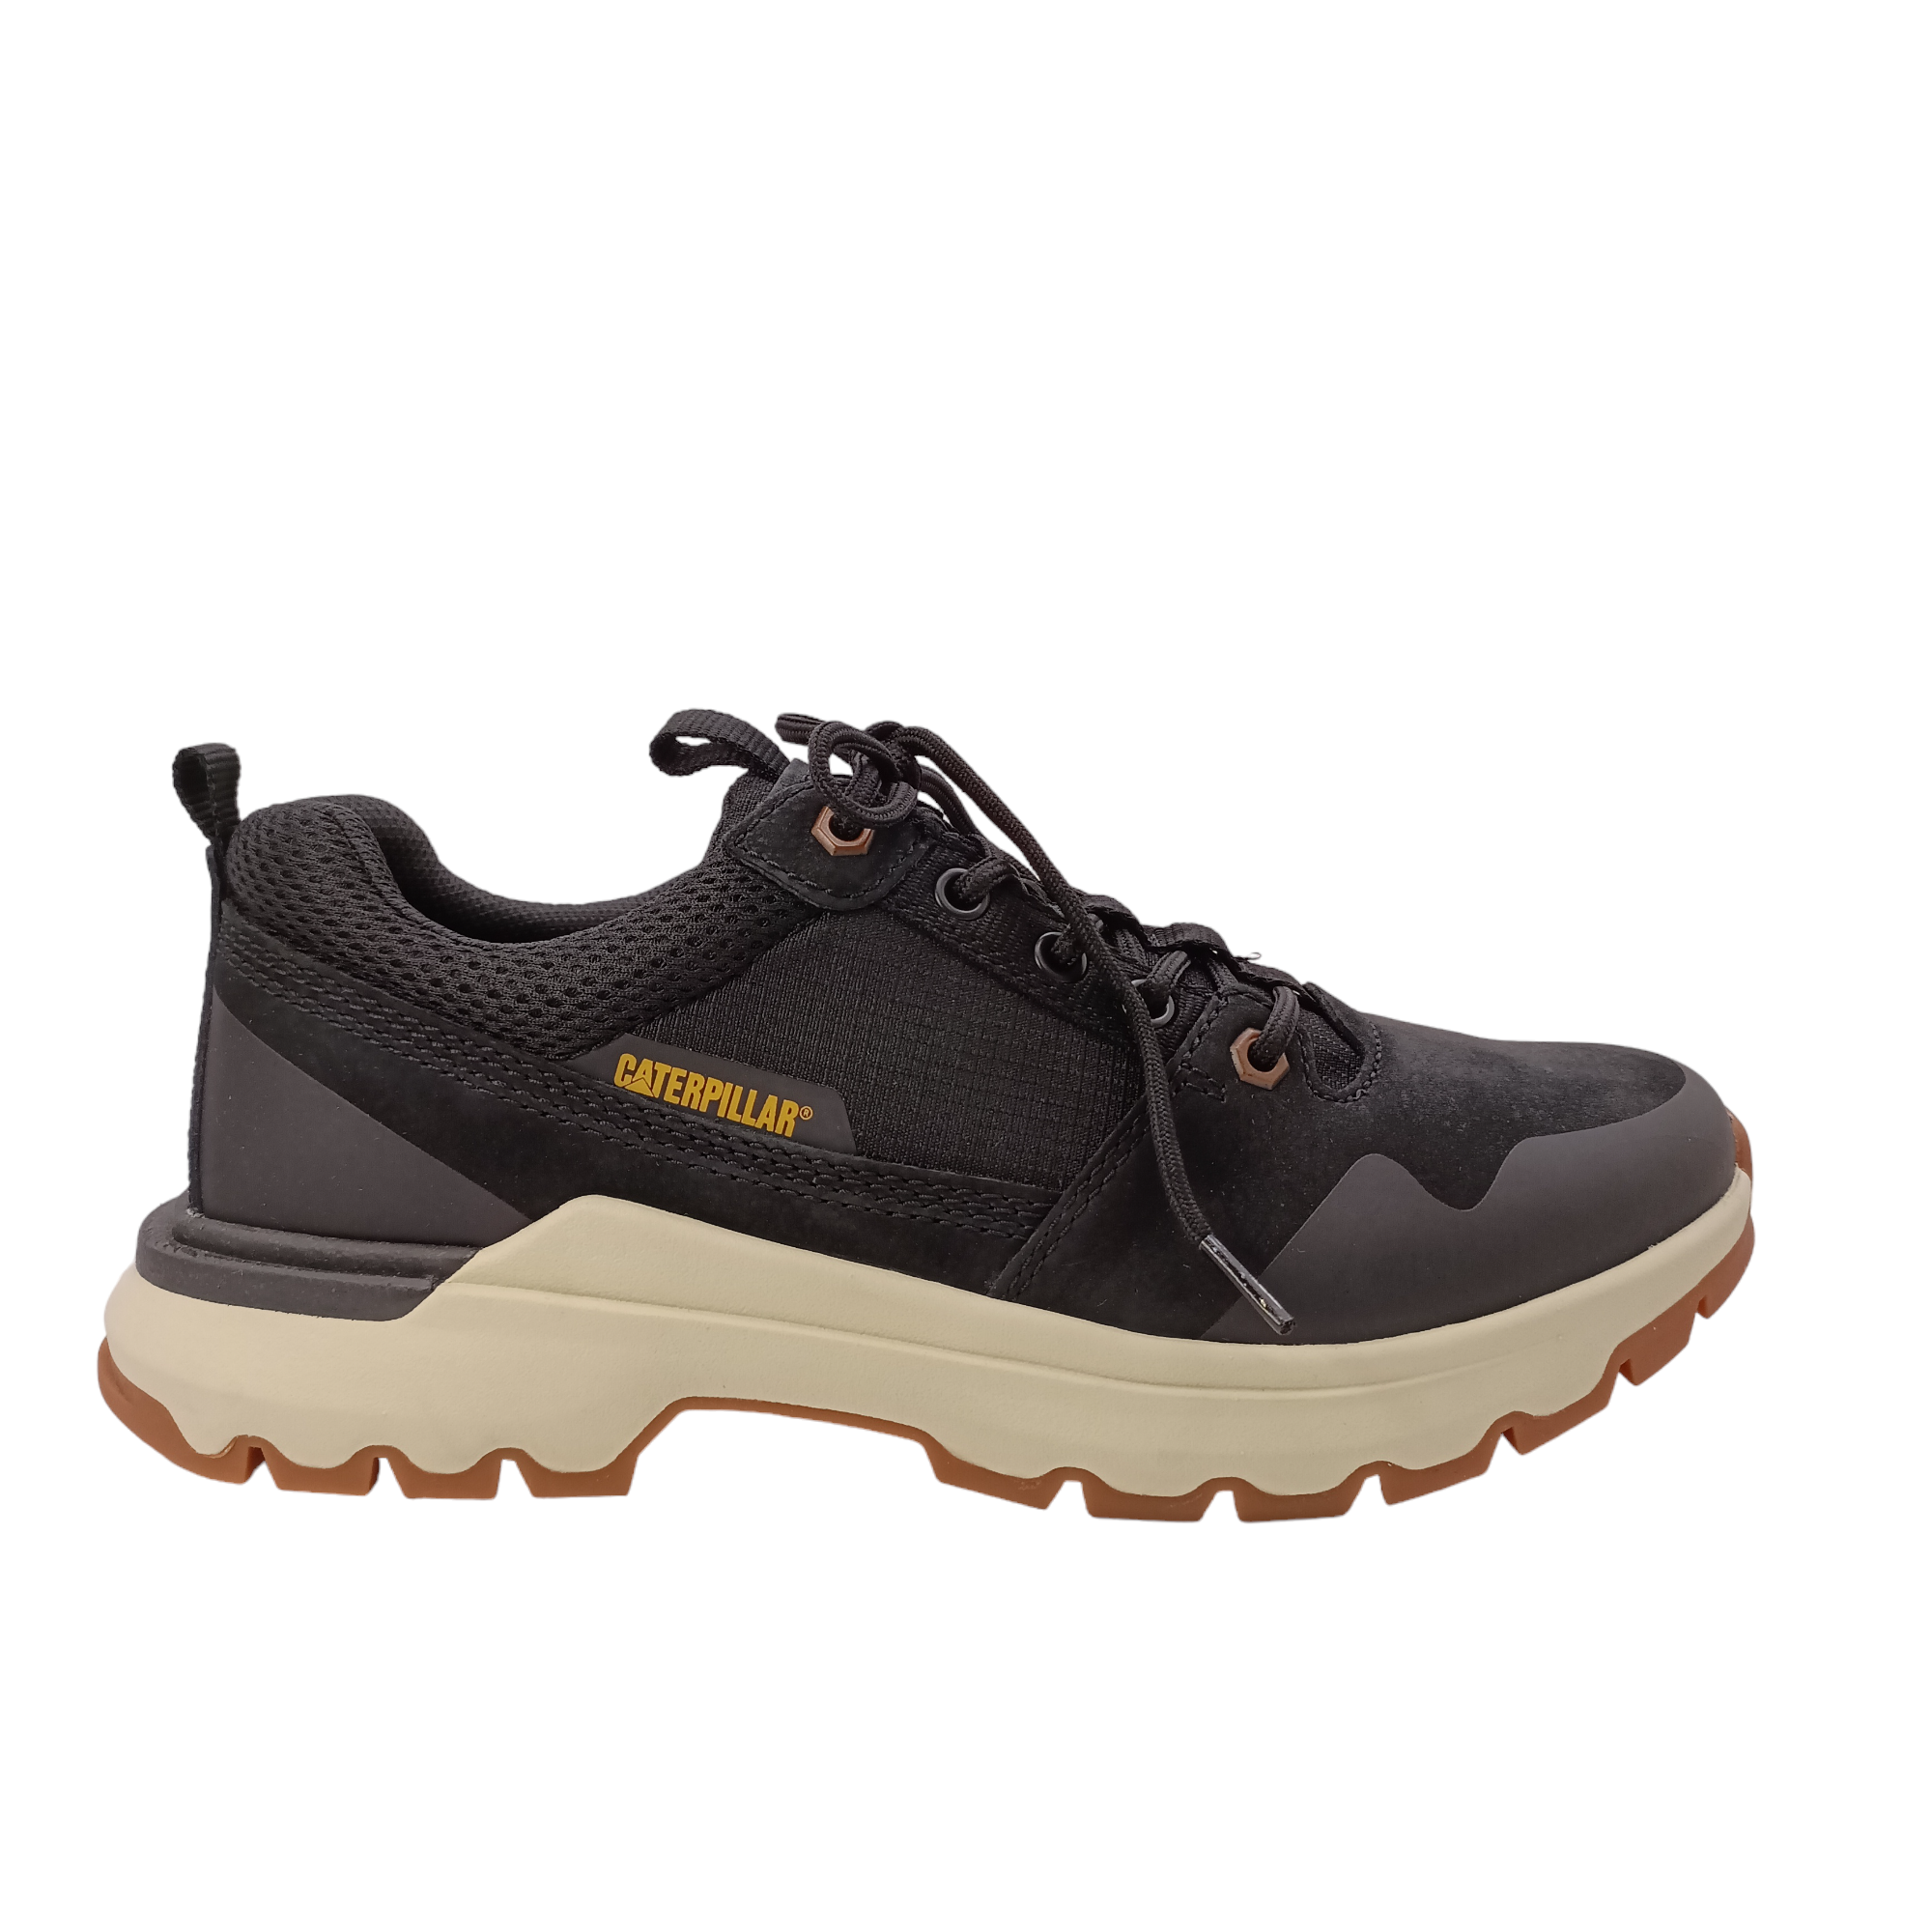 Shop Colorado Lo Caterpillar - with shoe&amp;me - from Caterpillar - Sneakers - Mens, Sneaker, Winter - [collection]